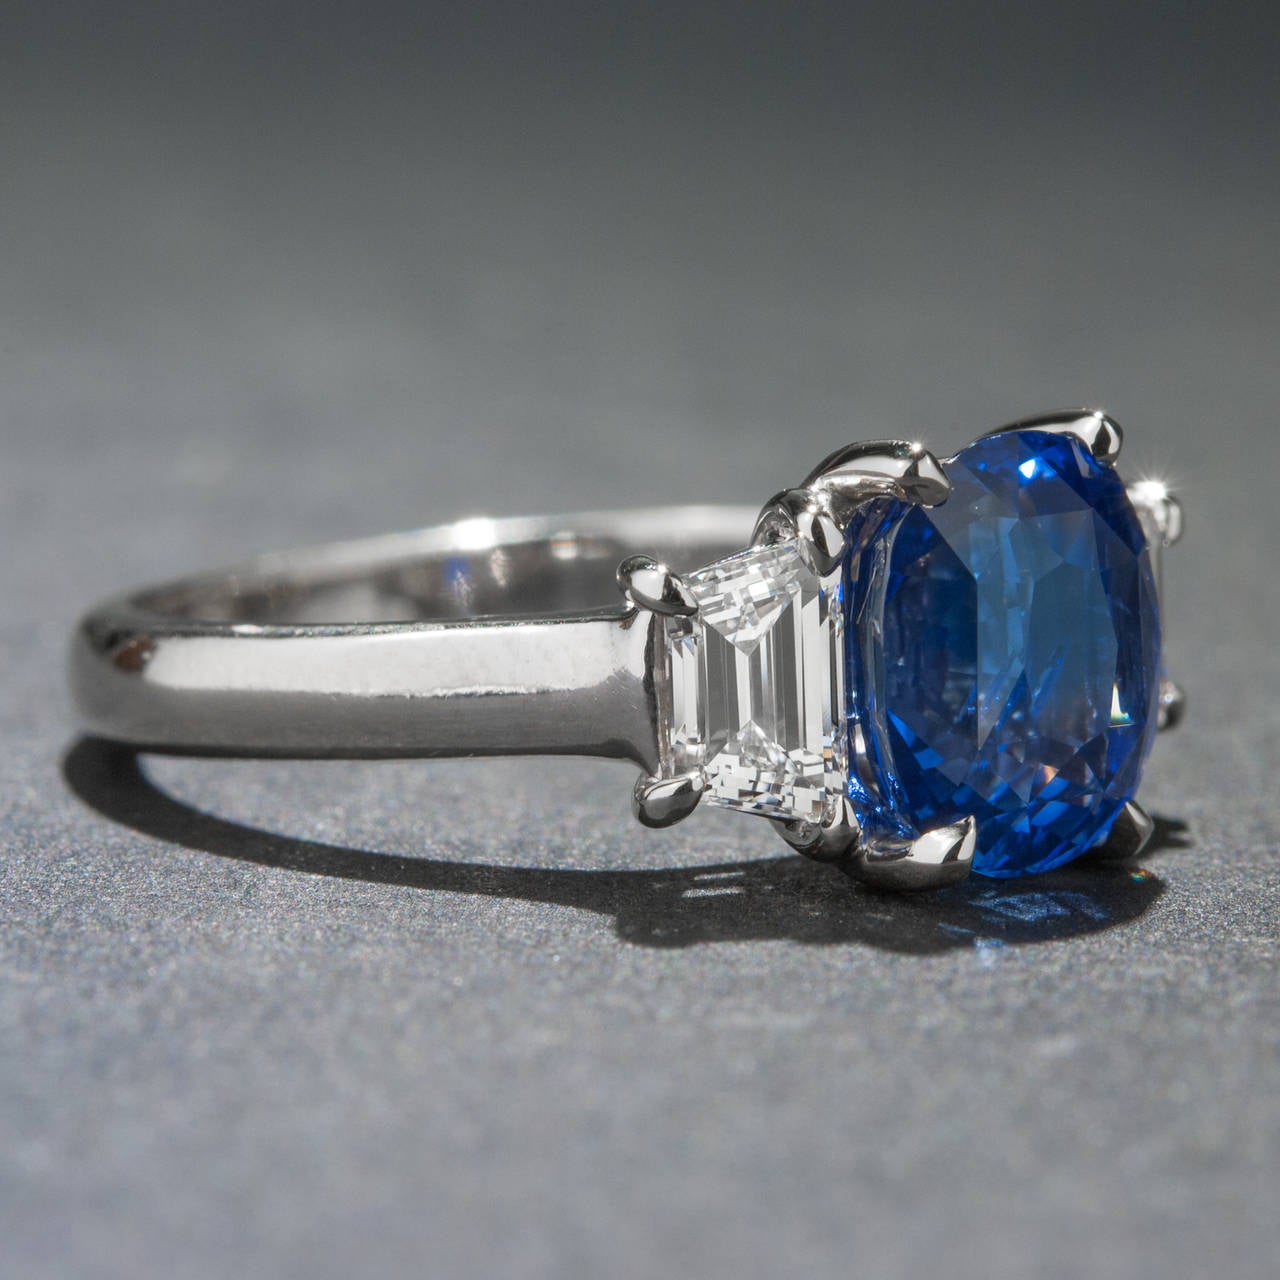 A beautiful sapphire, diamond and 14k white gold ring crafted circa 1960. This vibrant piece features a lovely 2.54 carat oval cut sapphire and two side diamonds for .70 total carats. The ring is currently size 6 and it can be sized to fit.